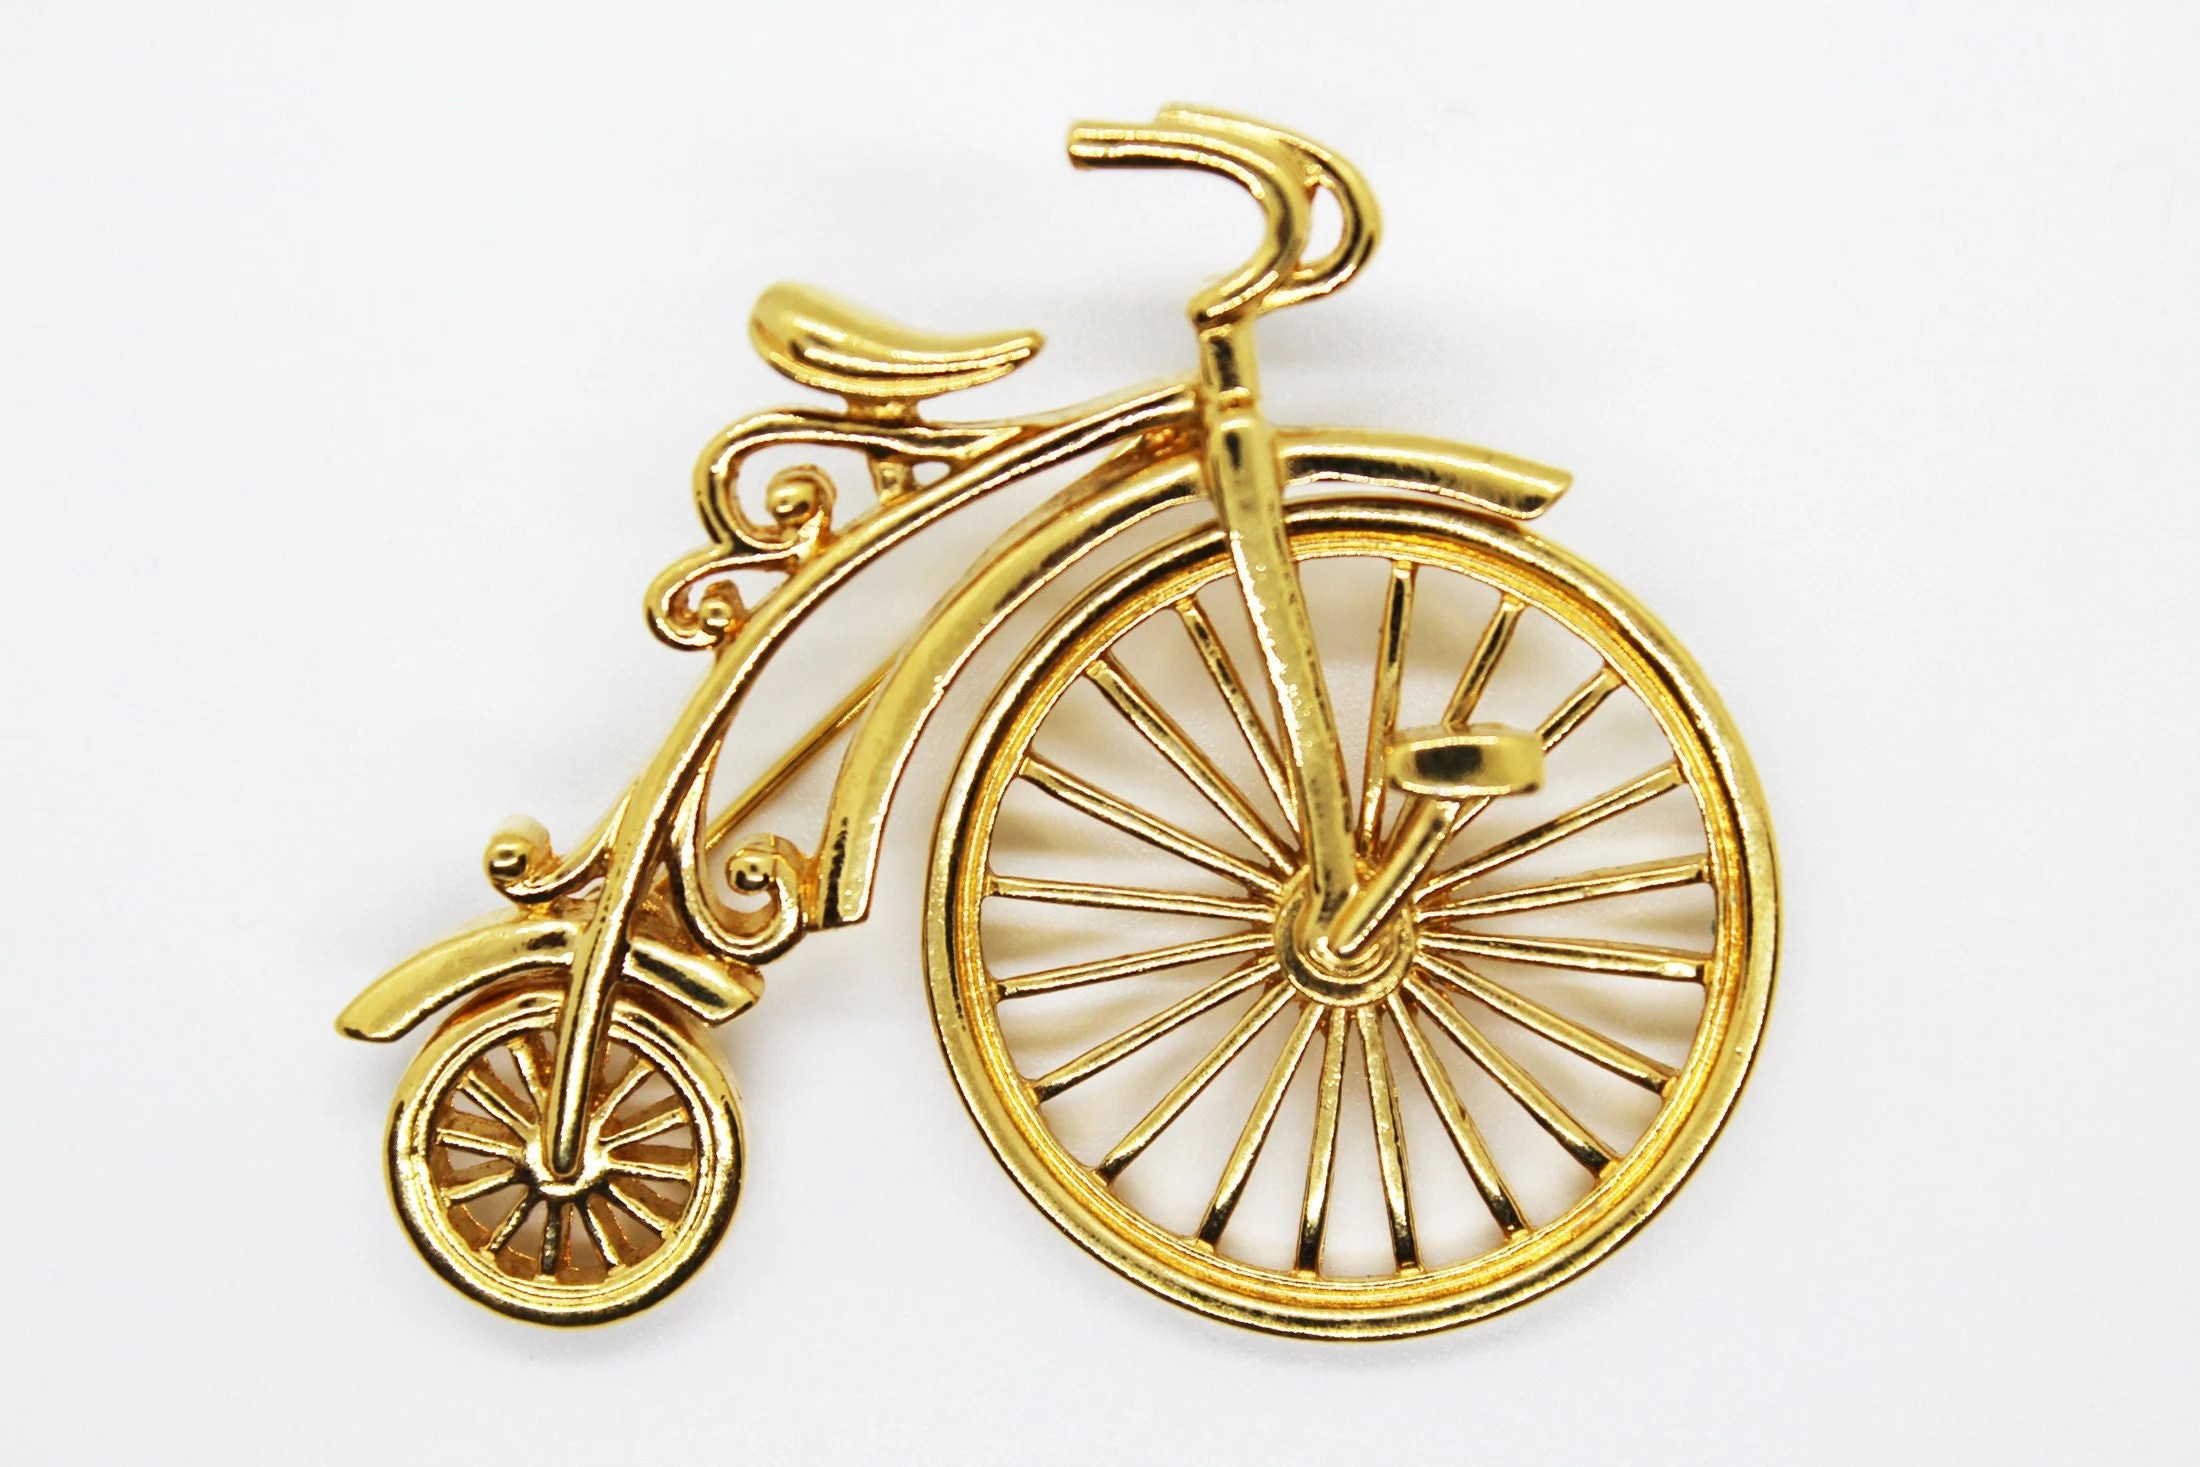 Gold Tone Articulated Penny Farthing Bicycle Brooch - Vintage, Retro, 1990s, Indie, Gilded Age, Victorian, Academia, Unisex Costume Jewelry